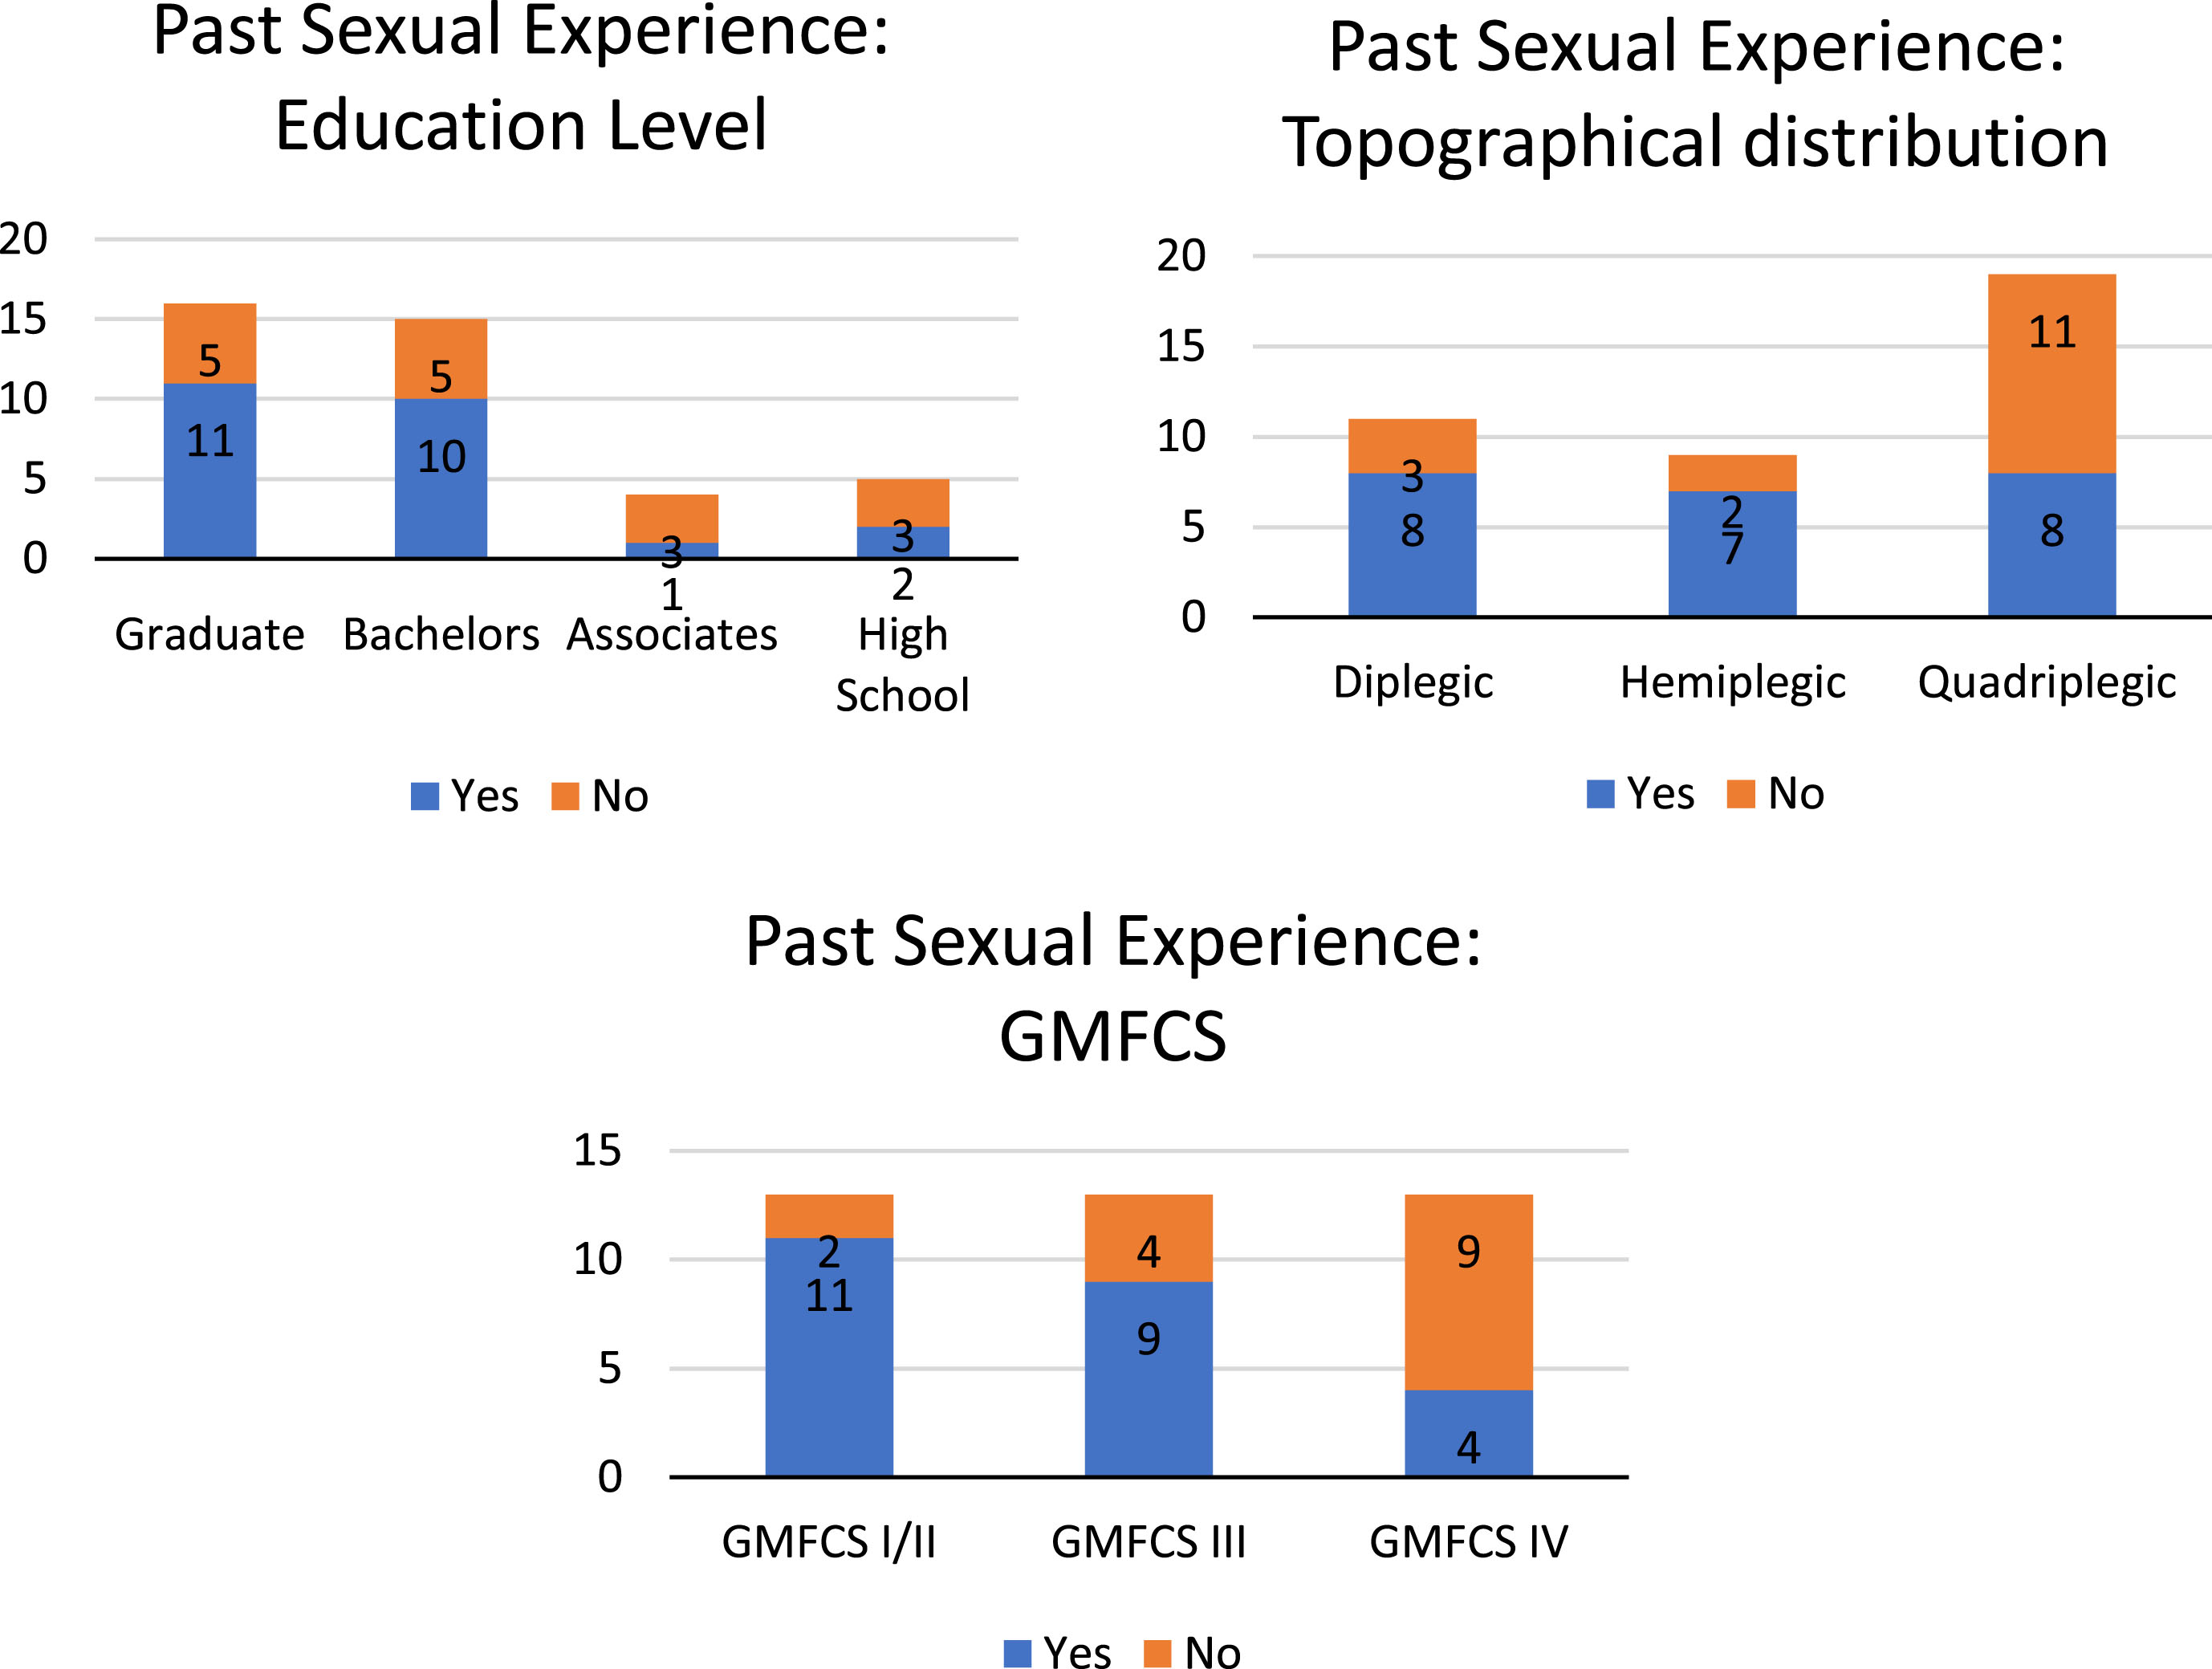 Past sexual experience by (a) education level, (b) Gross Motor Function Classification System (GMFCS) level, and (c) topographical distribution.